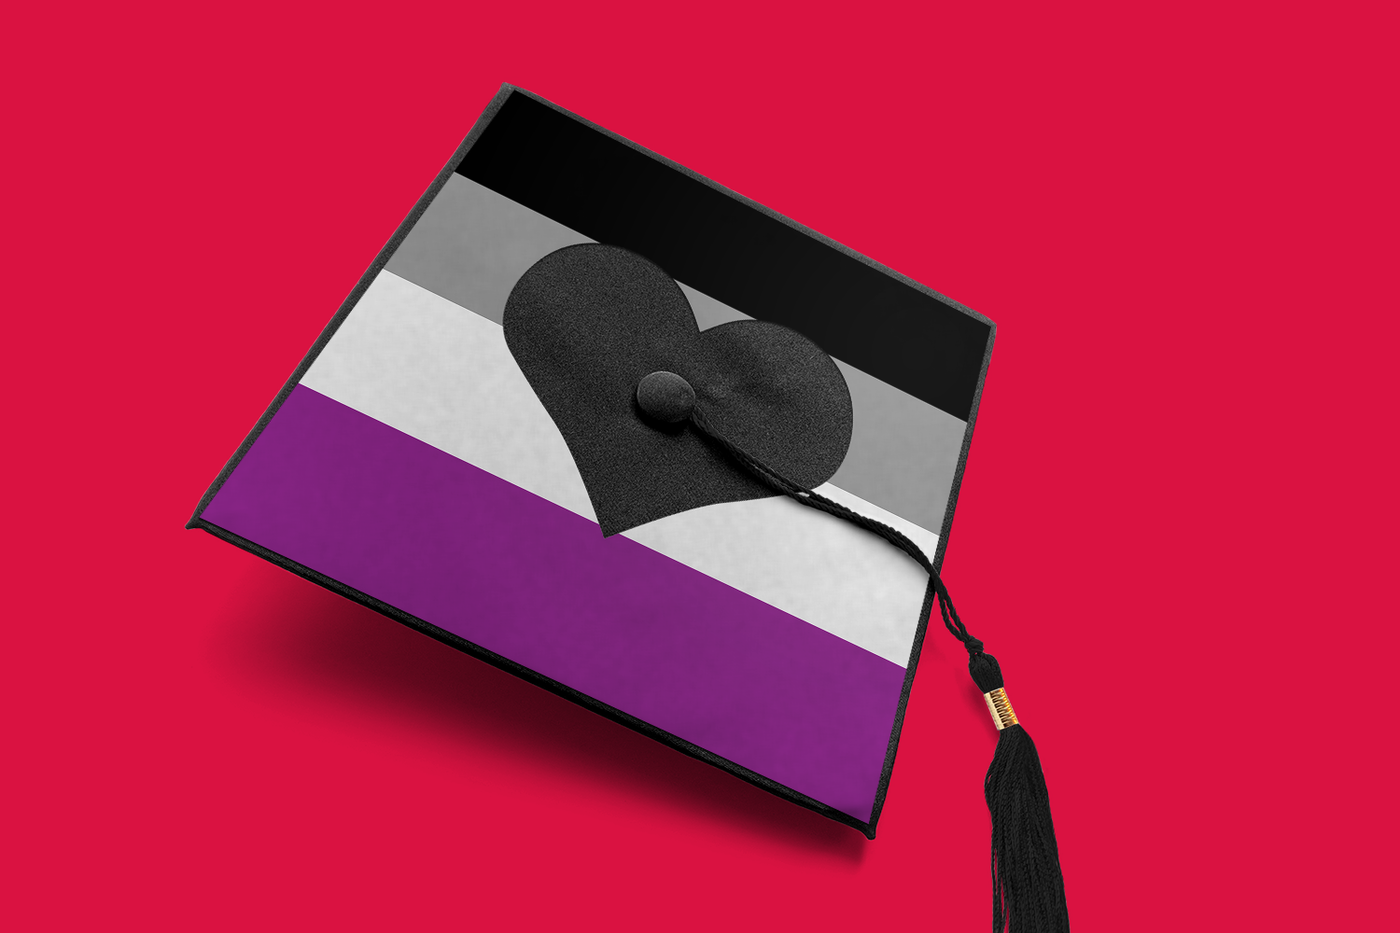 Grad cap with stripes and a large heart. The stripes are in the colors of a pride flag.